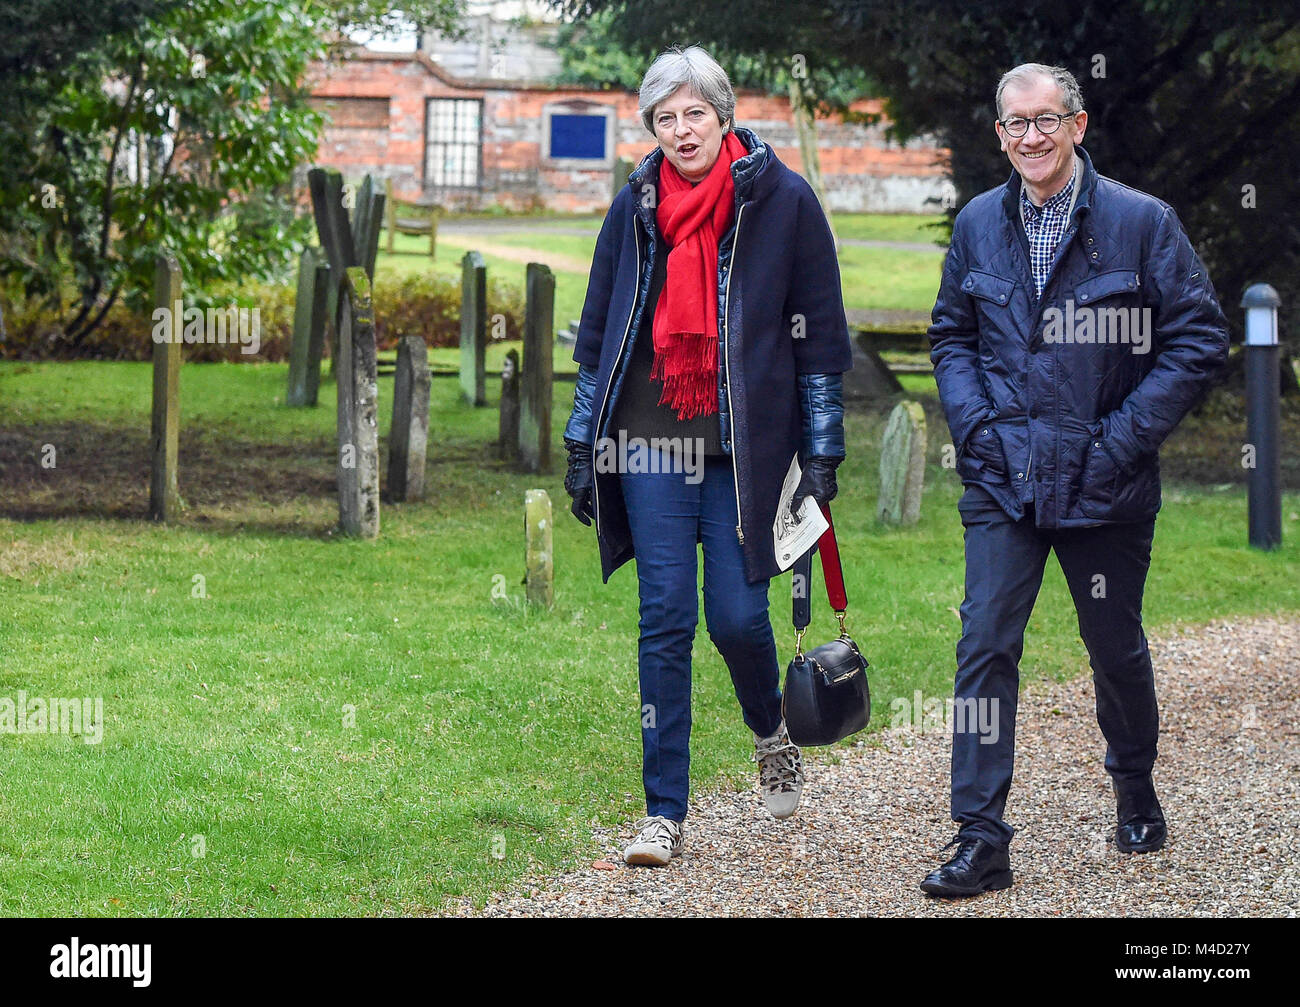 Maidenhead, UK. 04 February, 2018. Prime Minister Theresa May, accompanied by her husband Philip, attends a church service near her Maidenhead constituency. Stock Photo